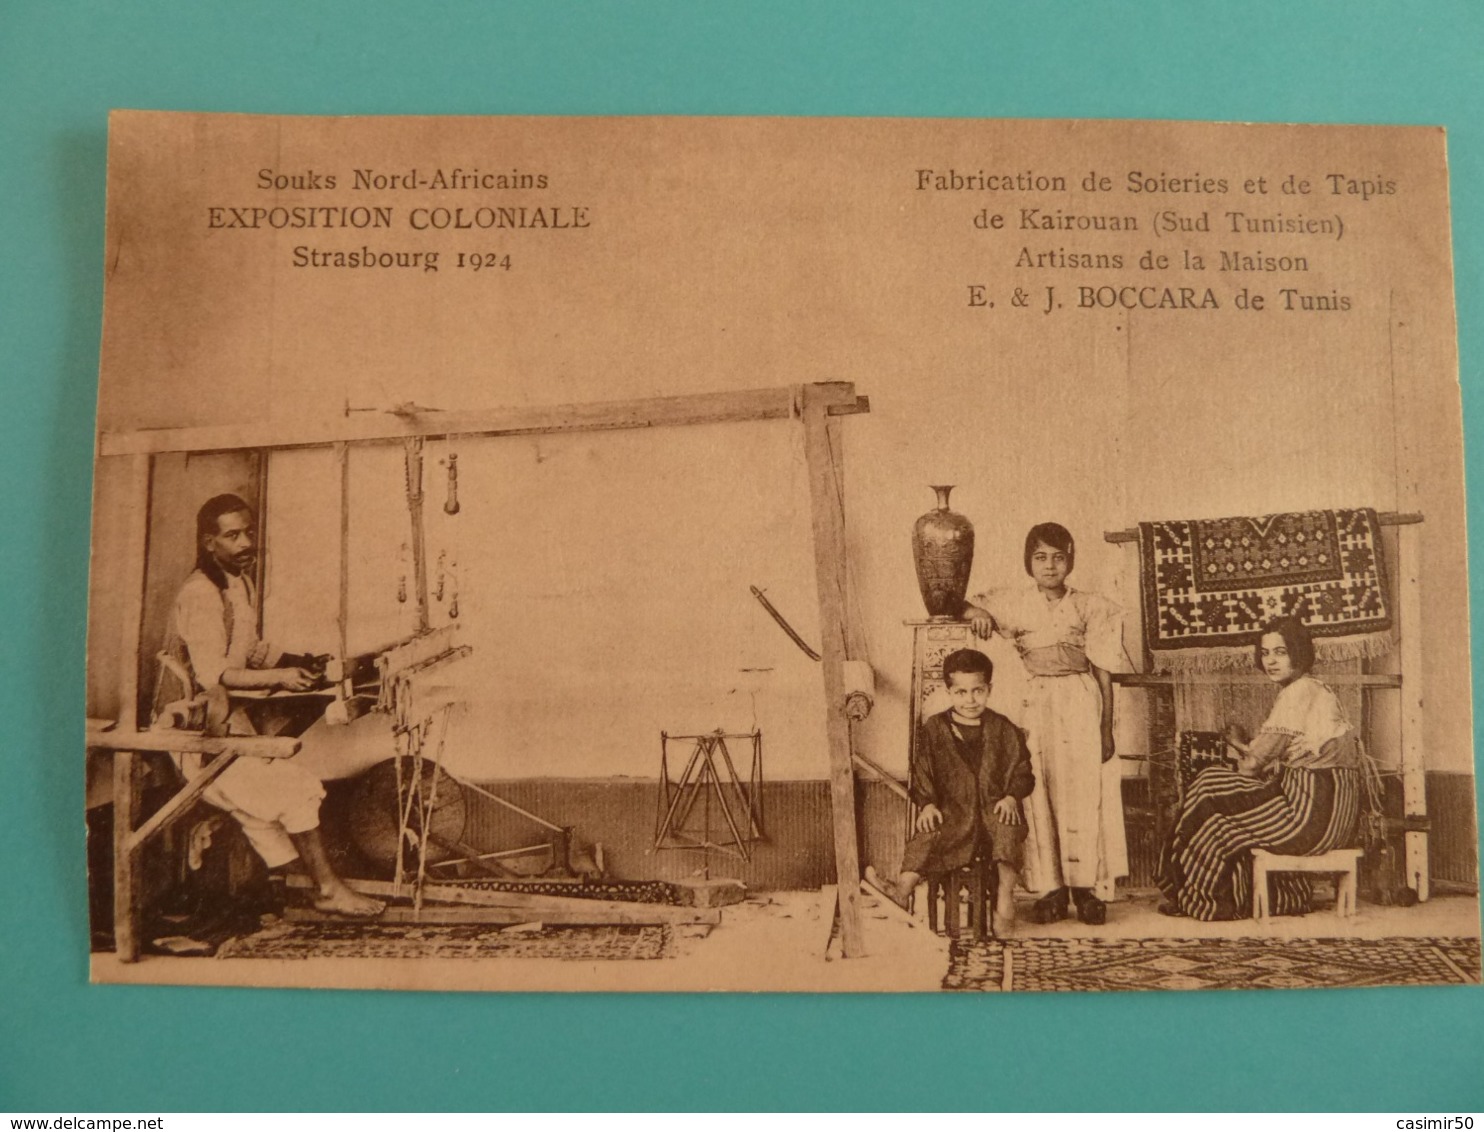 EXPOSITION COLONIALE STRASBOURG 1924 SOUKS NORD AFRICAINS - Expositions